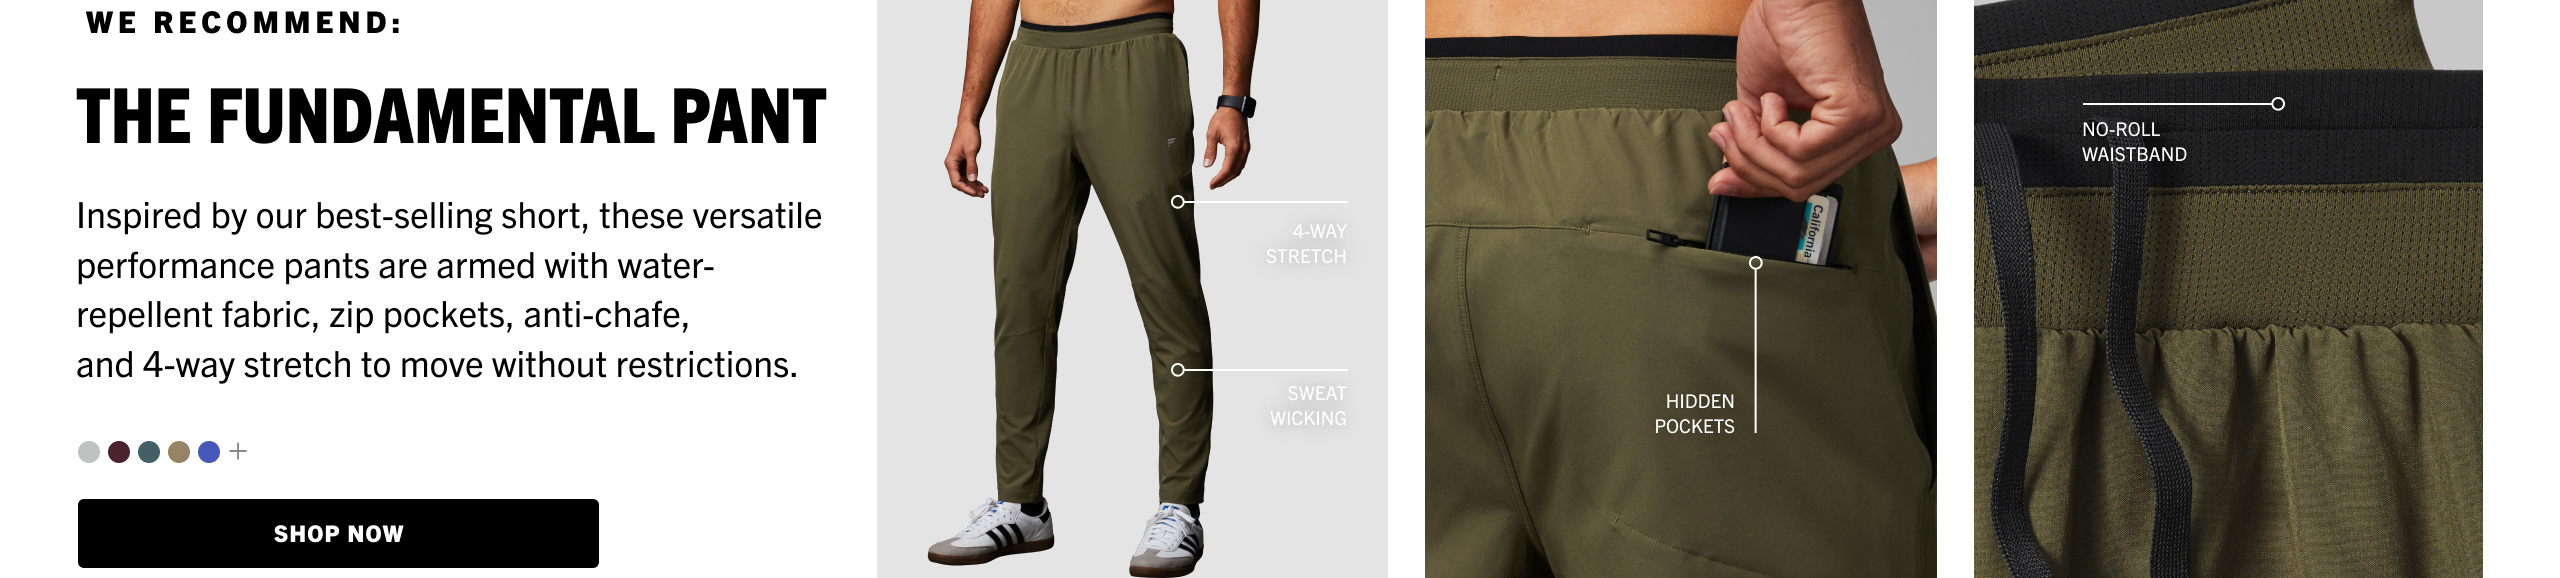 Find your perfect pant, whether you're looking to workout and lounge, office to golf, versatile, and more.